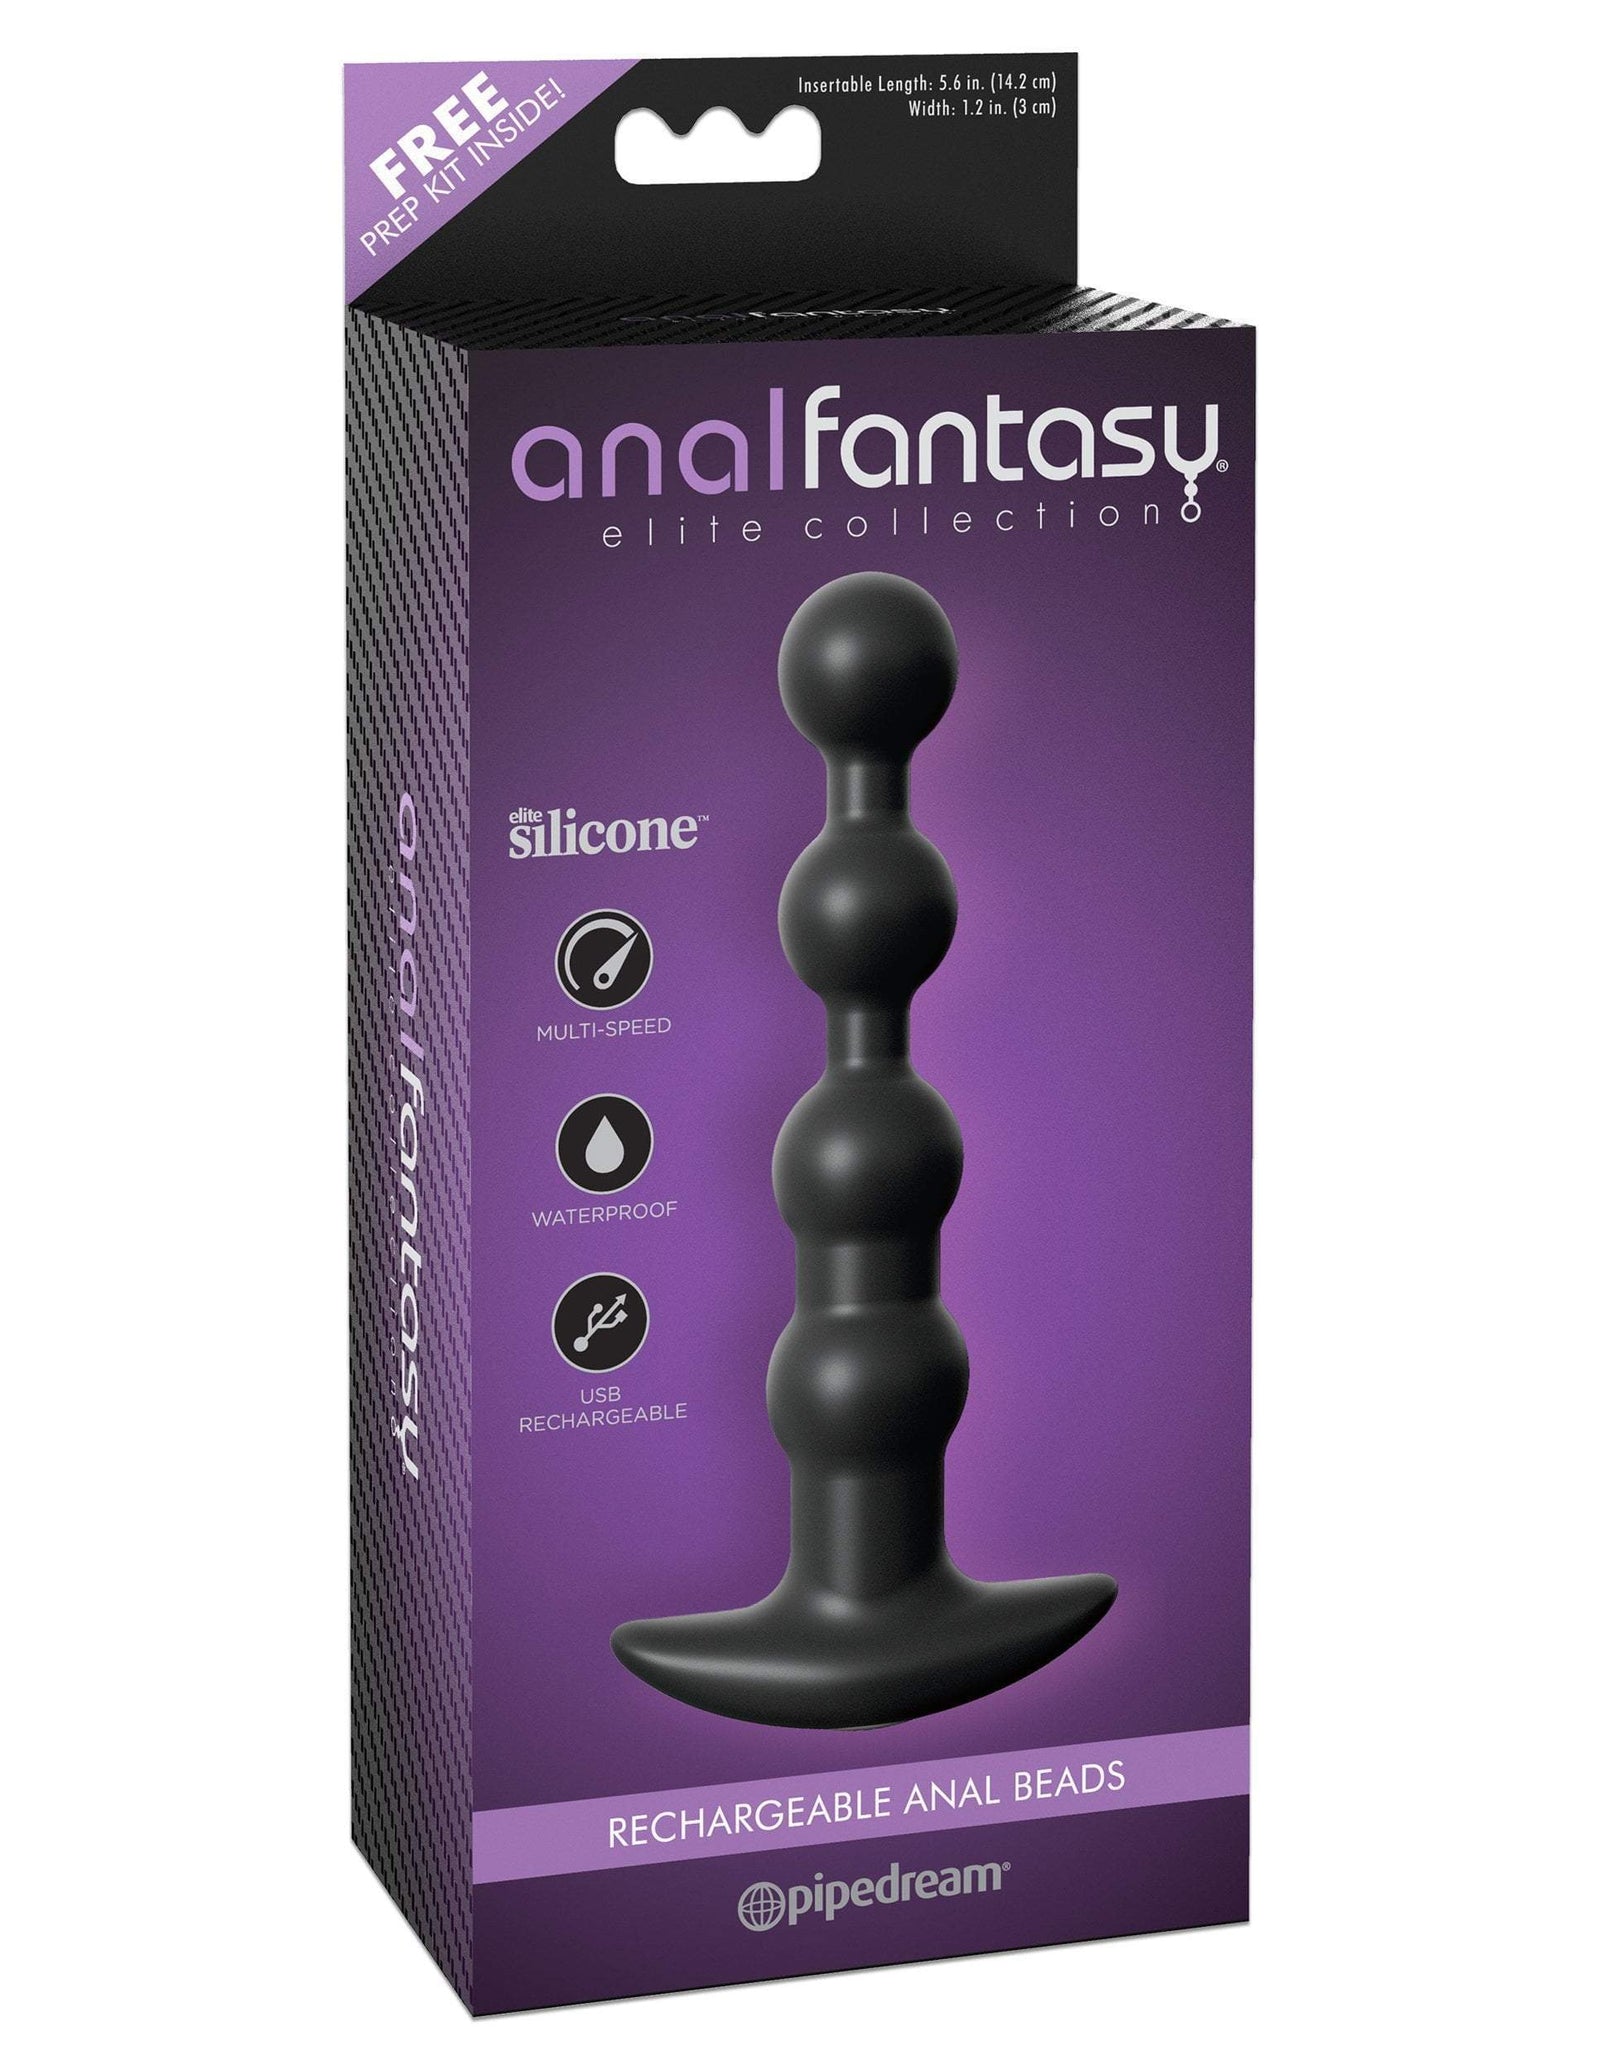 Pipedream - Anal Fantasy Elite Collection Rechargeable Anal Beads (Black) Anal Beads (Vibration) Rechargeable